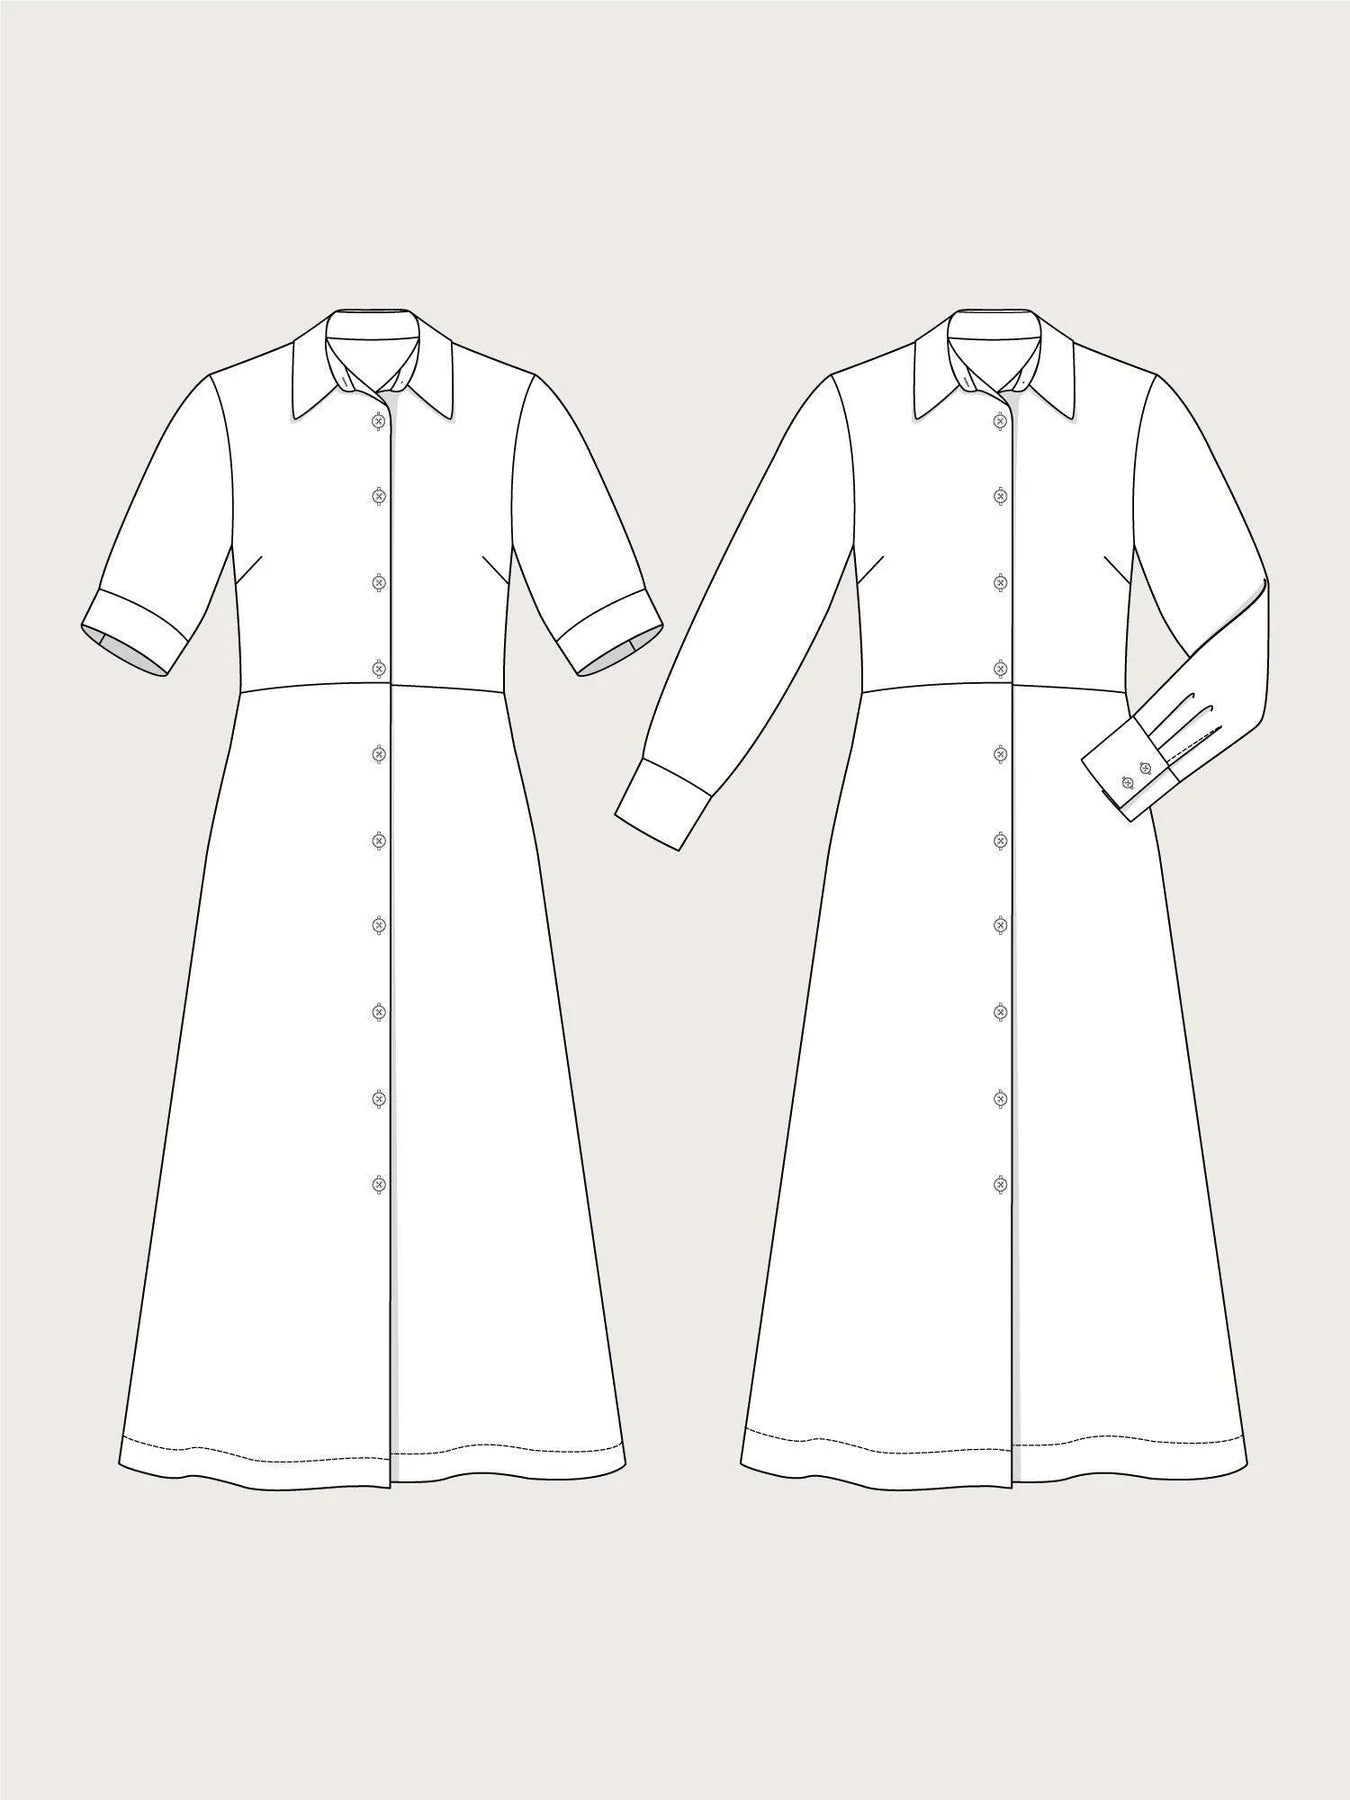 Shirt Dress - Sewing Pattern | The Assembly Line